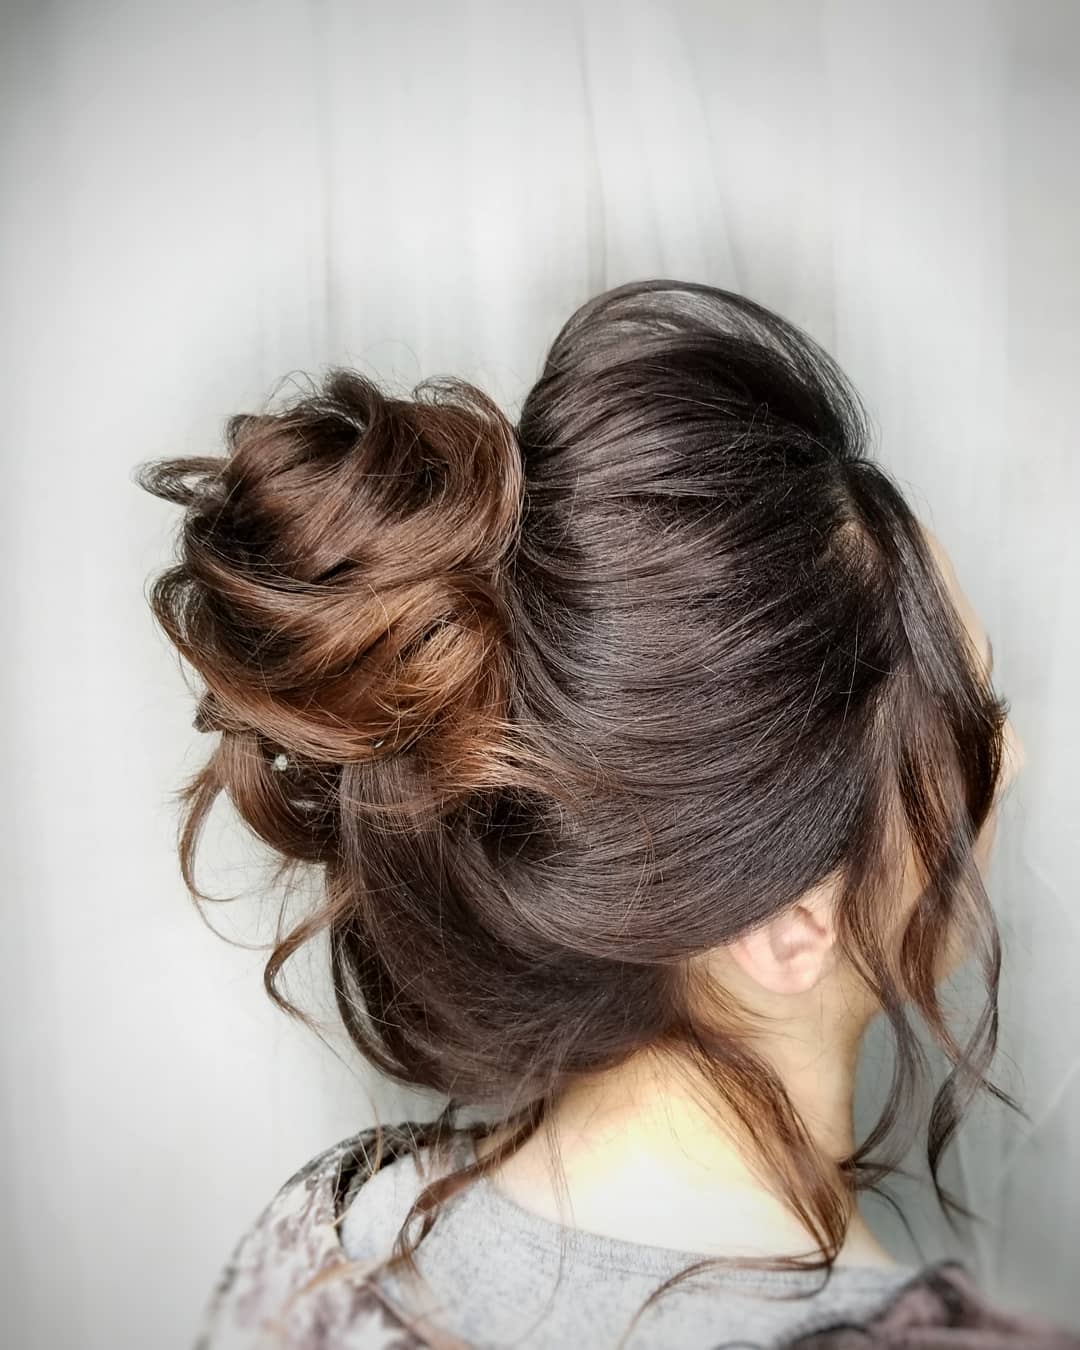 Messy hairdo for casuals